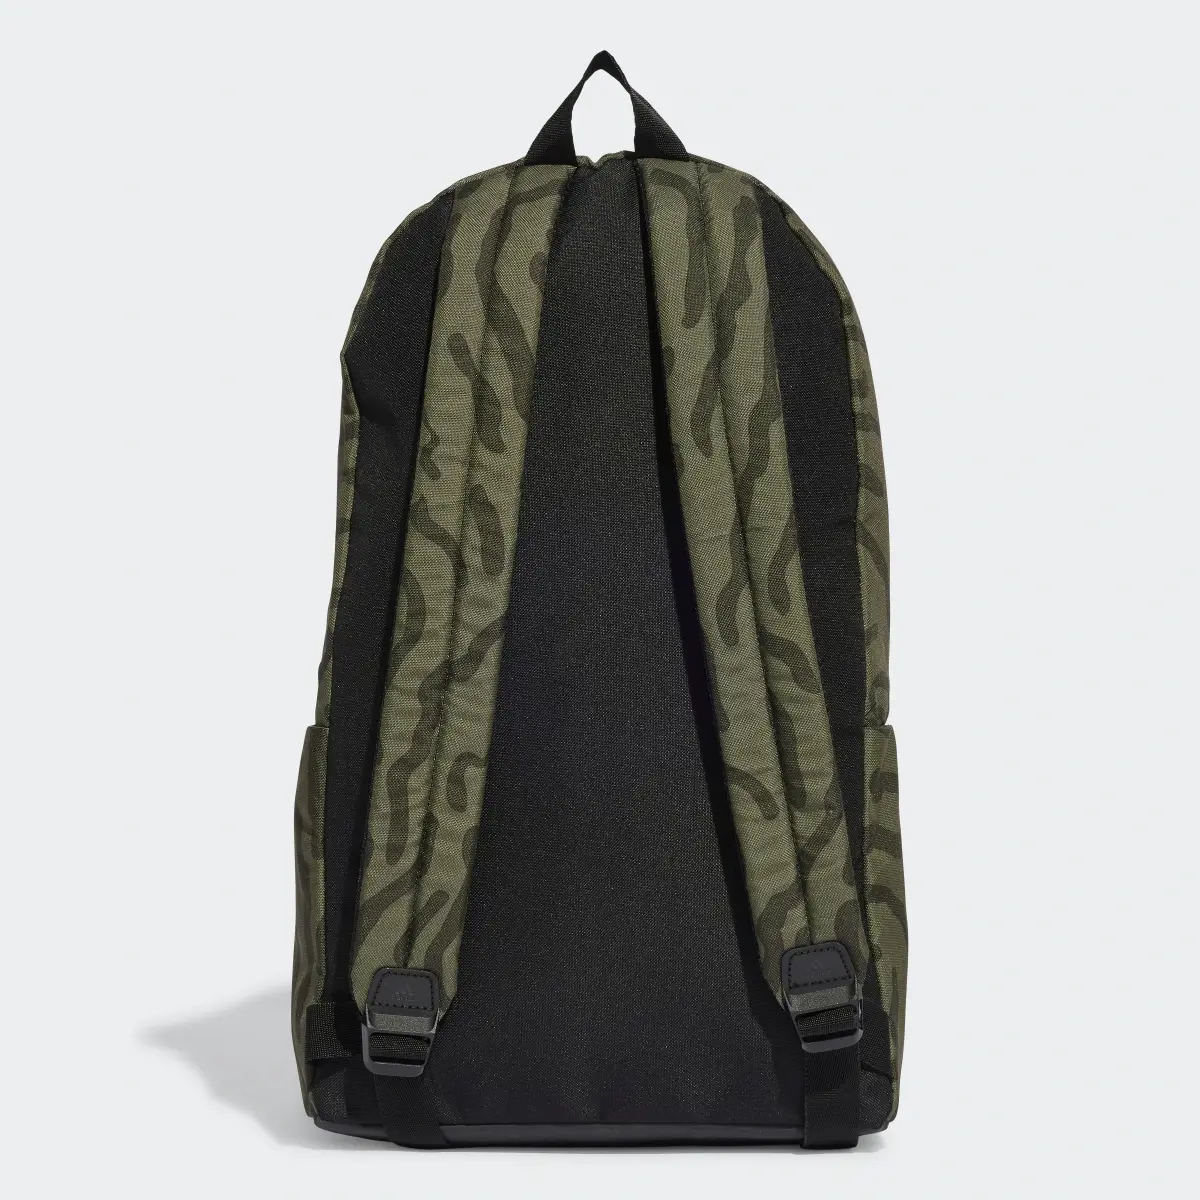 Adidas Classic Texture Graphic Backpack. 3